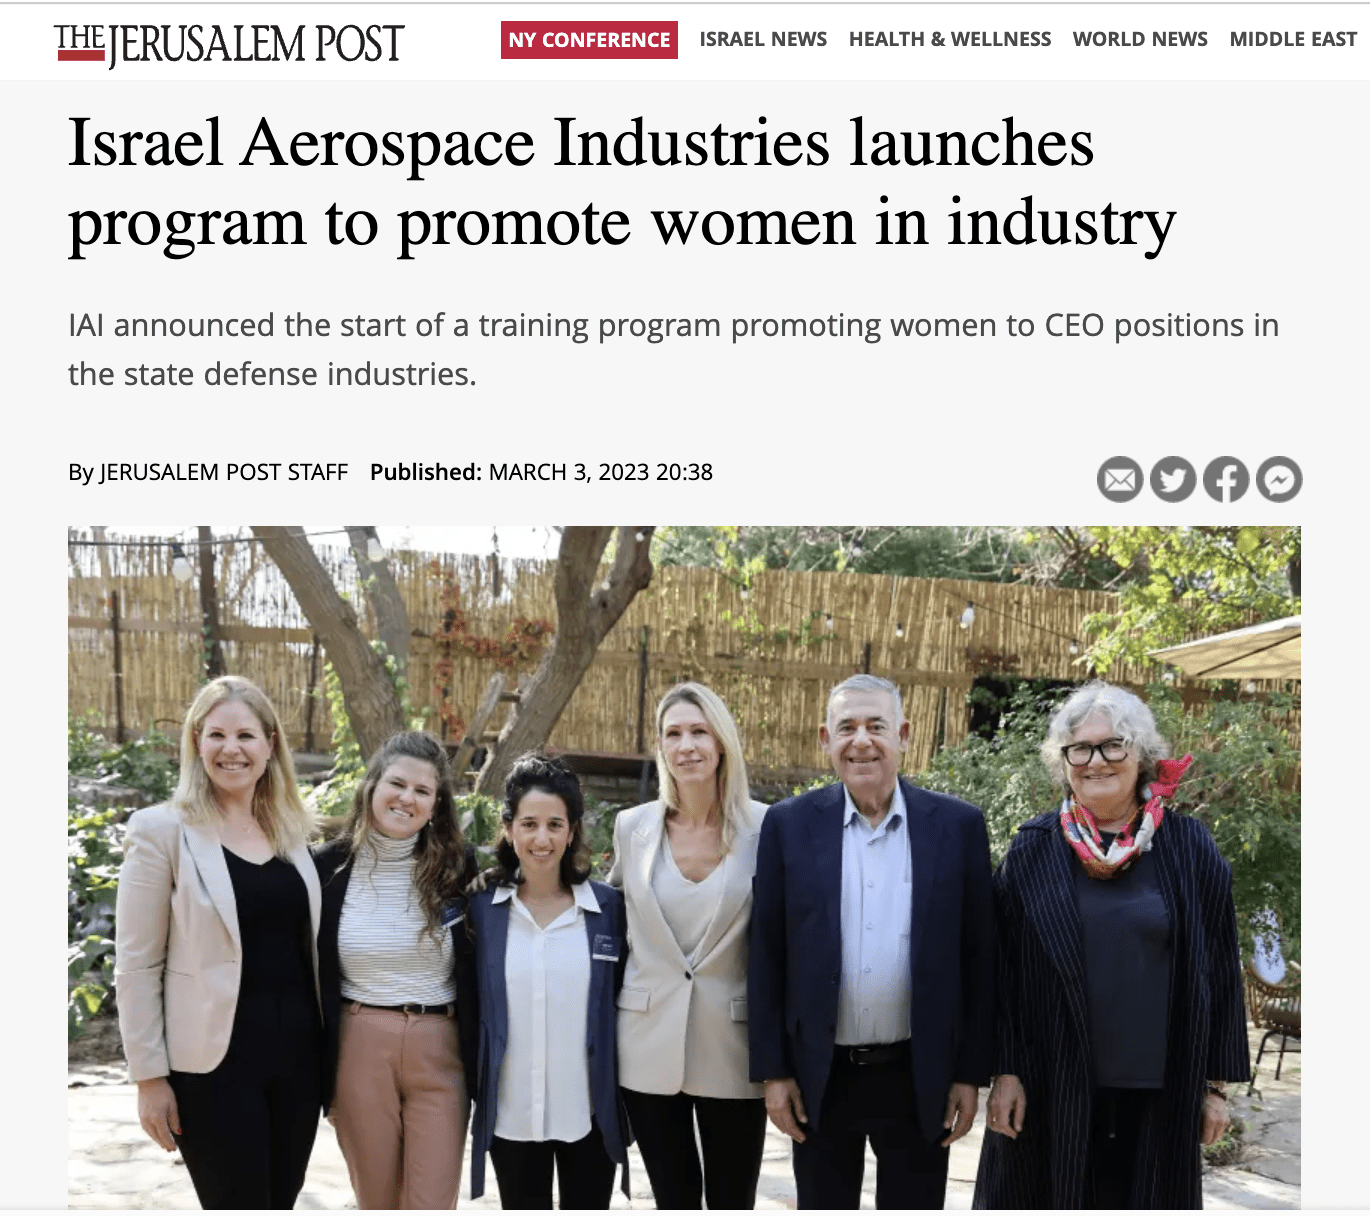 Israel Aerospace Industries launches program to promote women in industry